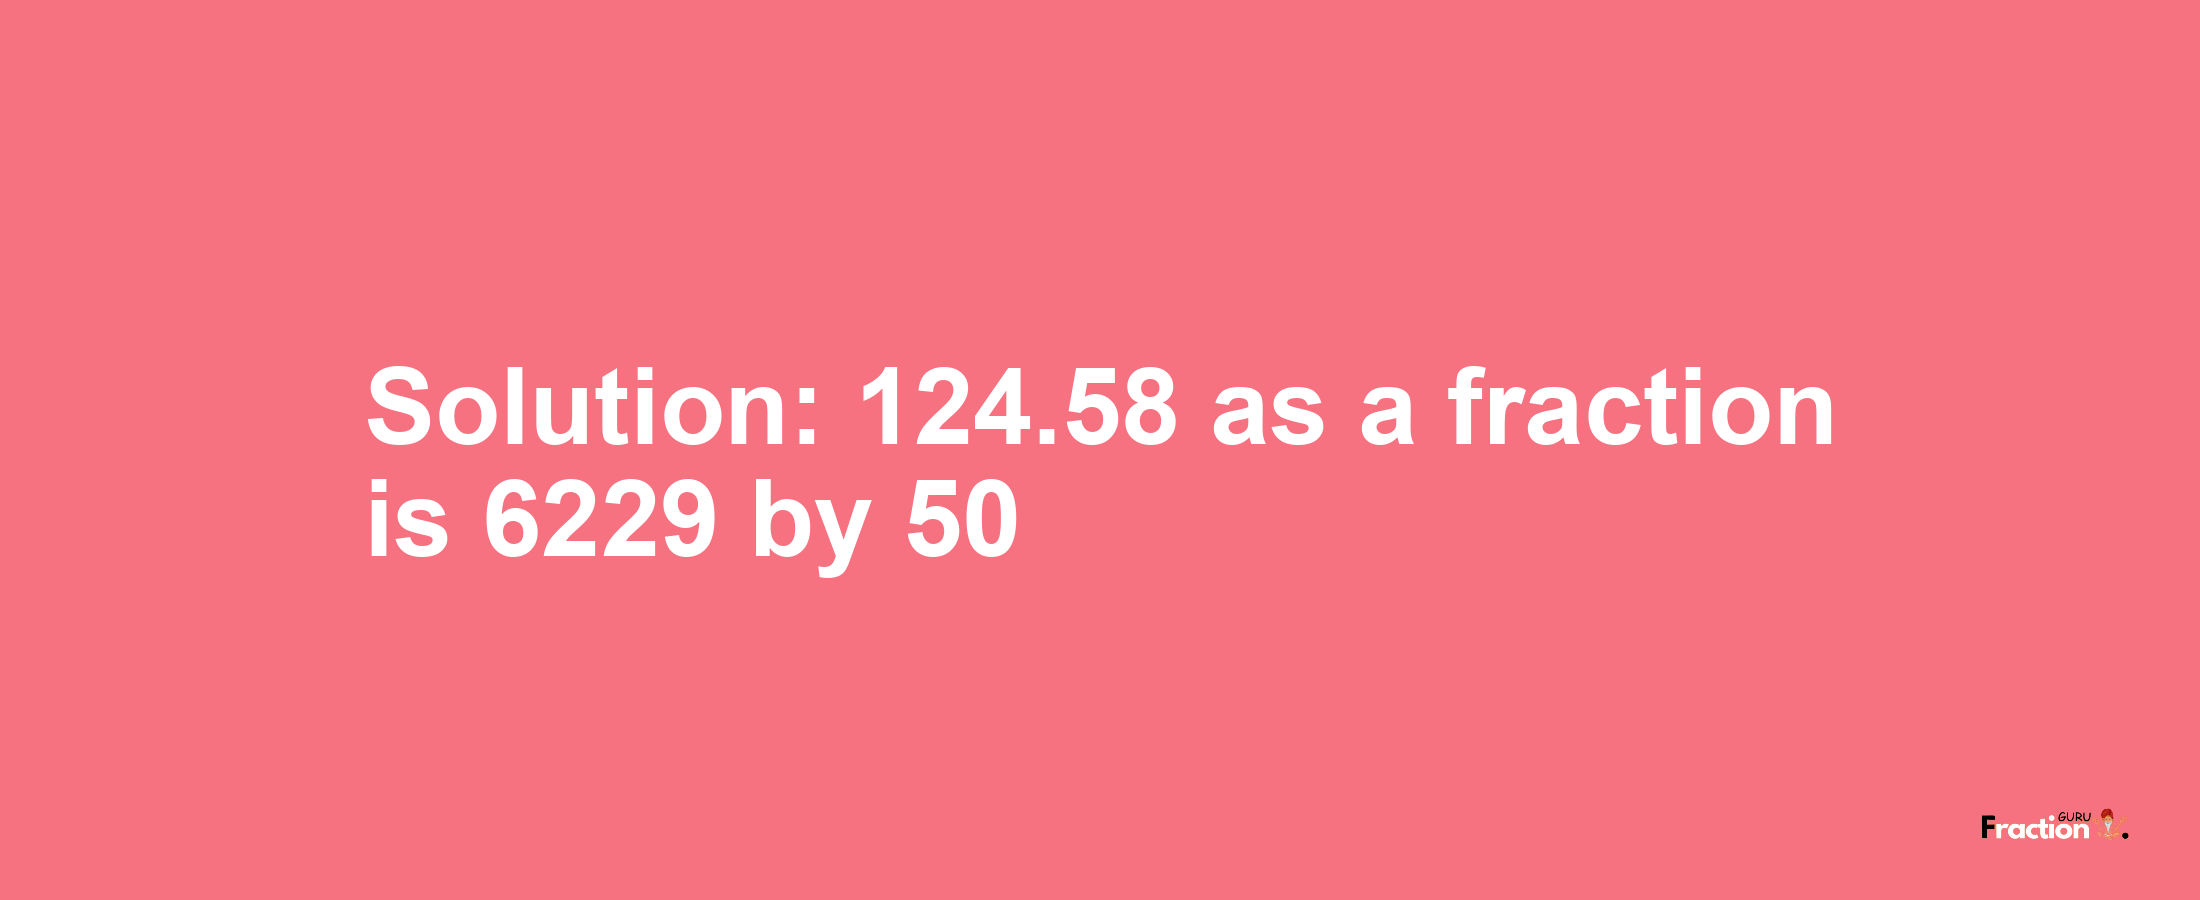 Solution:124.58 as a fraction is 6229/50